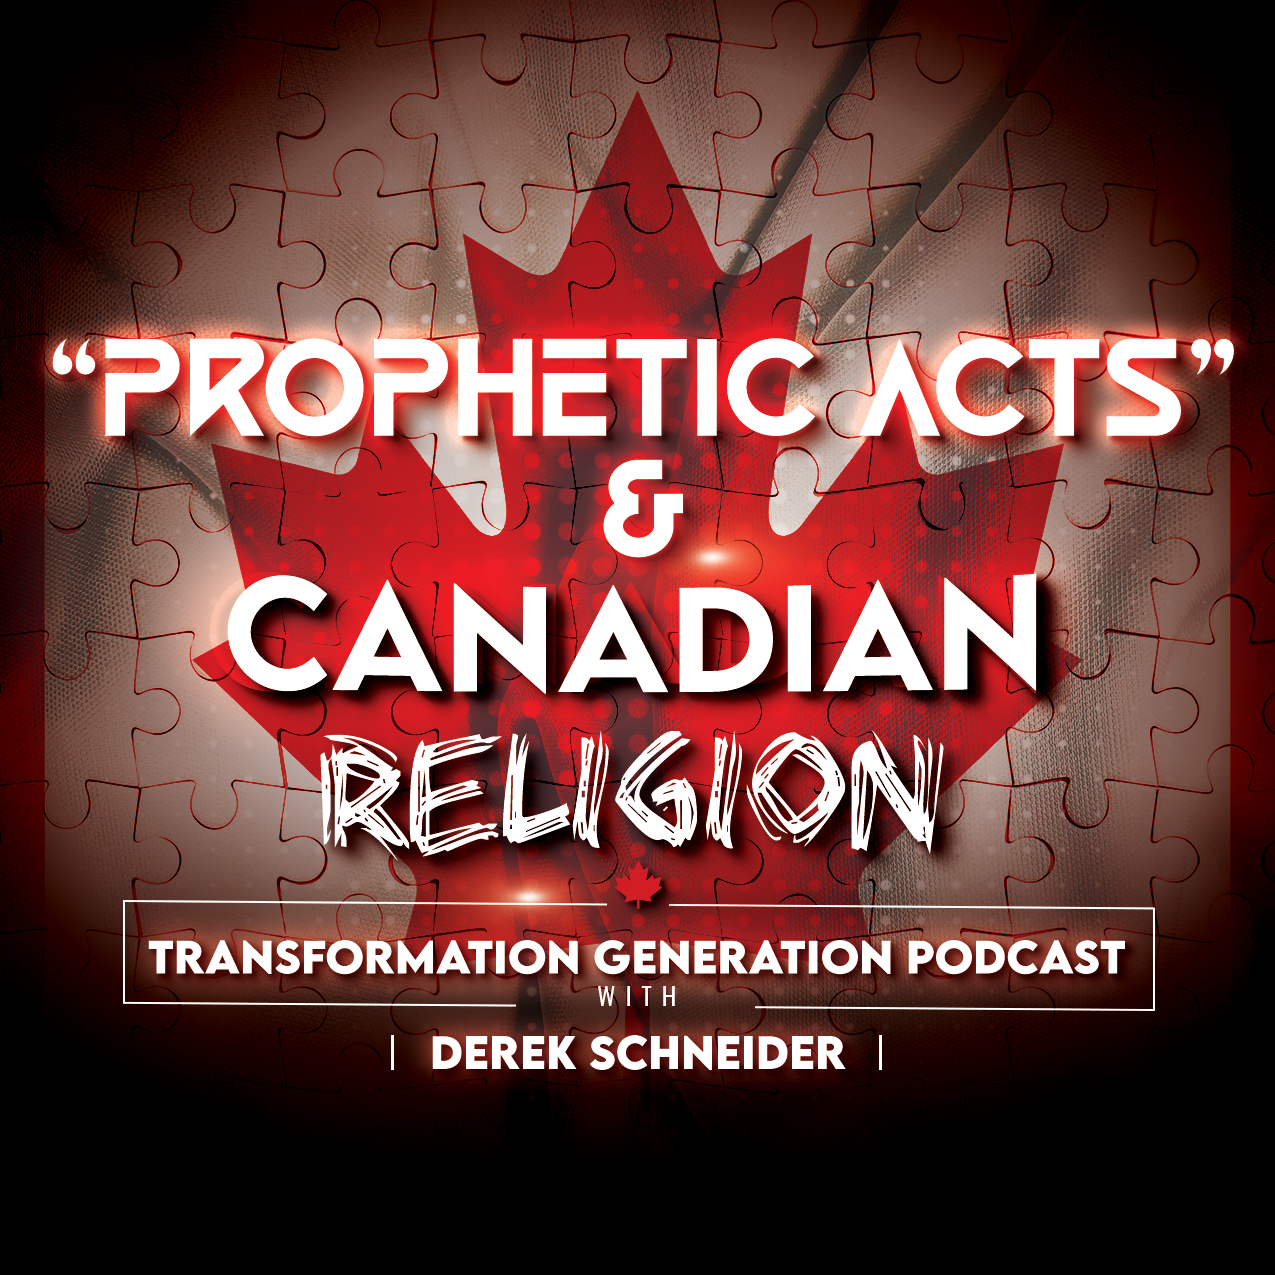 “Prophetic Acts” and Charismatic Religion